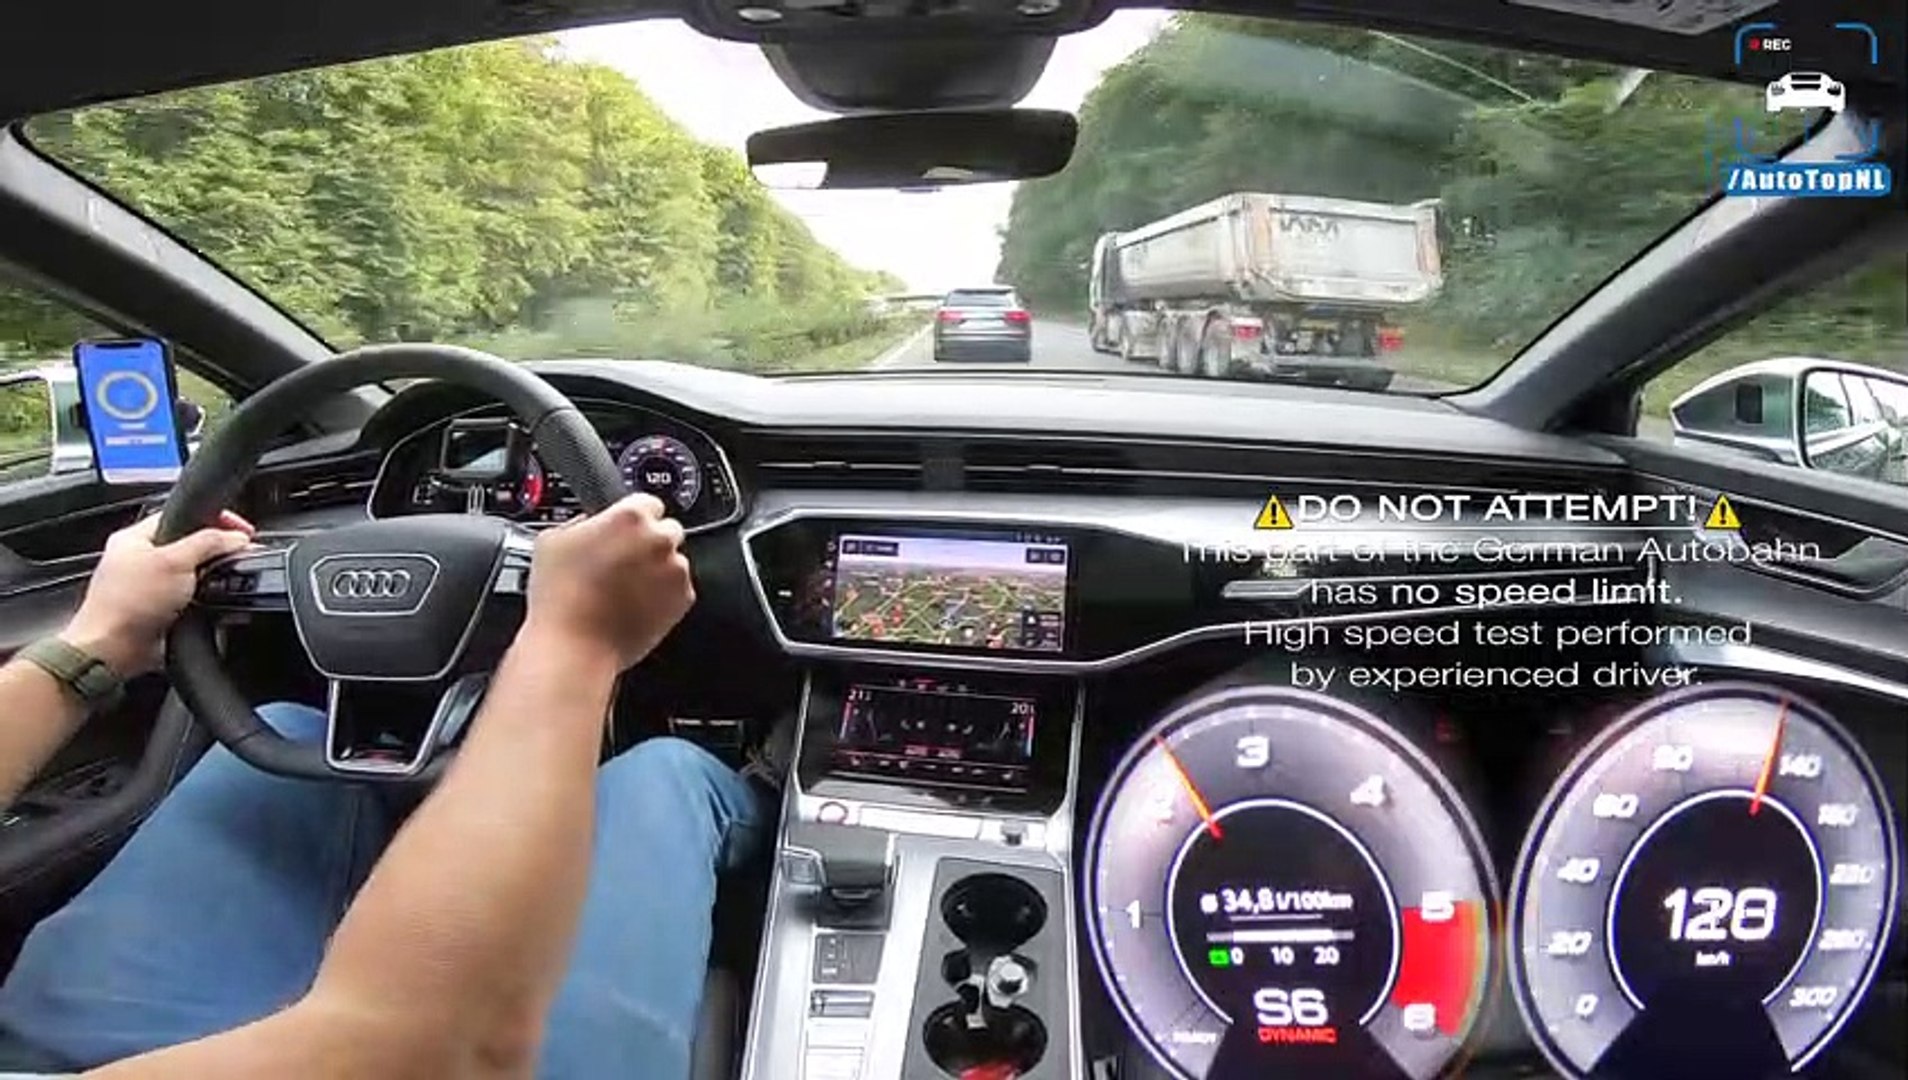 AUDI S6 2020 TOP SPEED on AUTOBAHN (No Speed Limit) by AutoTopNL